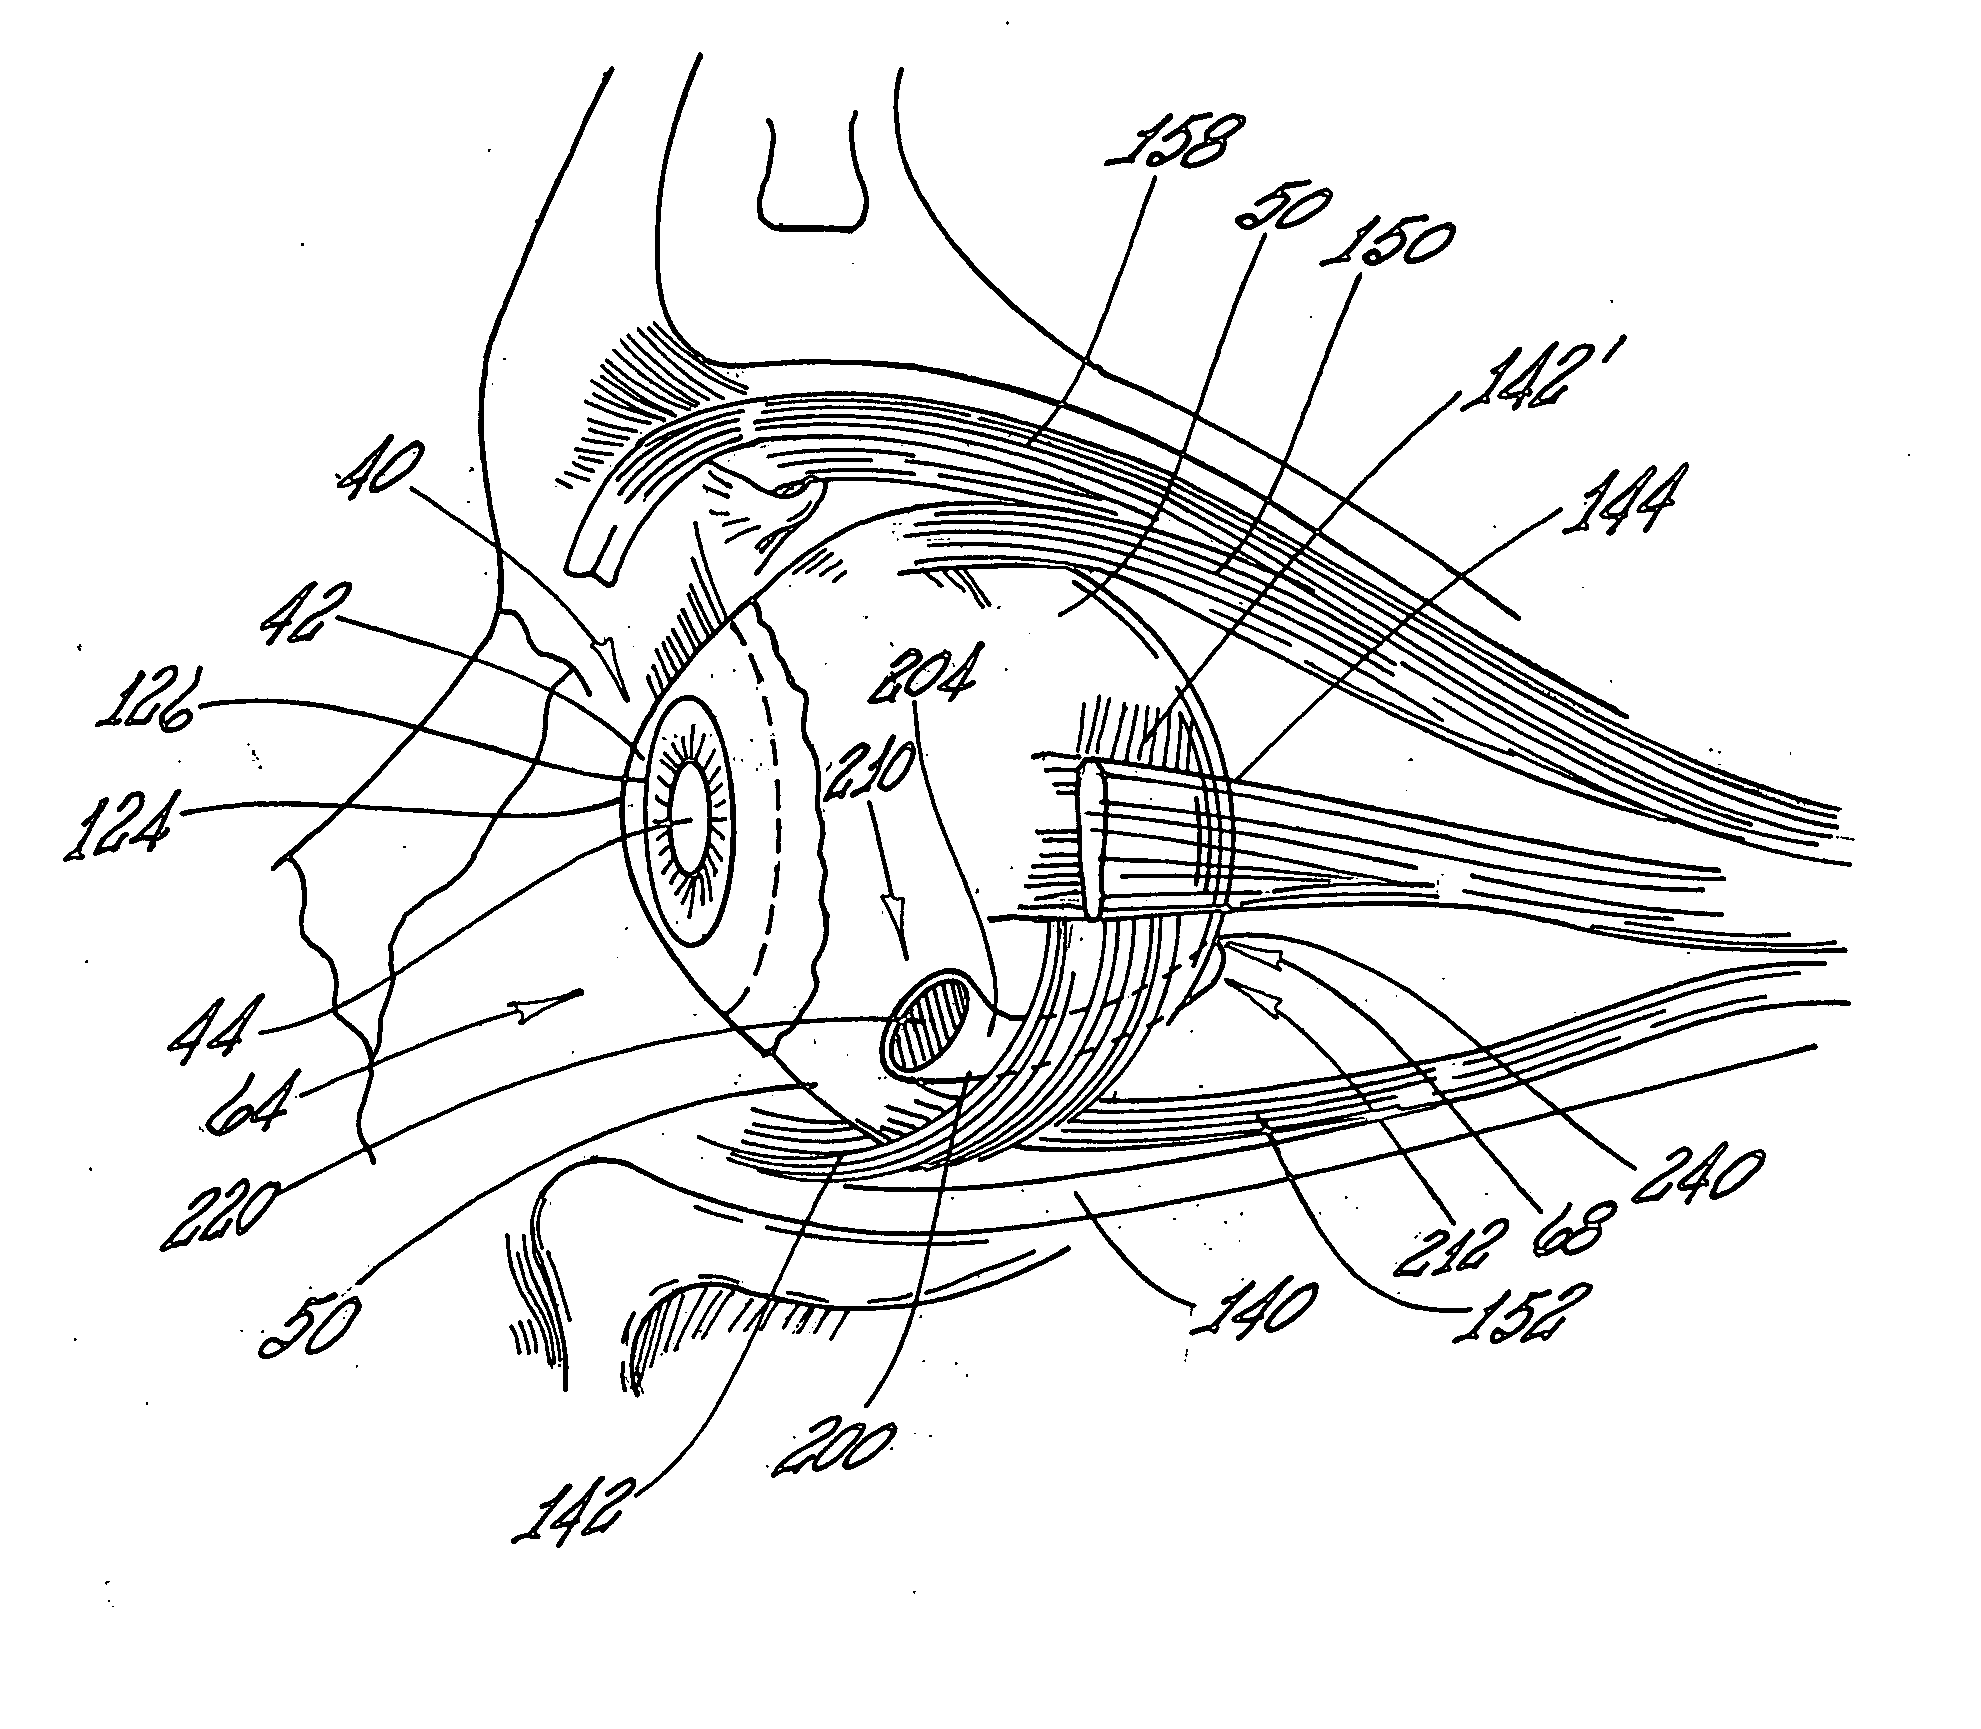 Implantable delivery device for administering pharmacological agents to an internal portion of a body